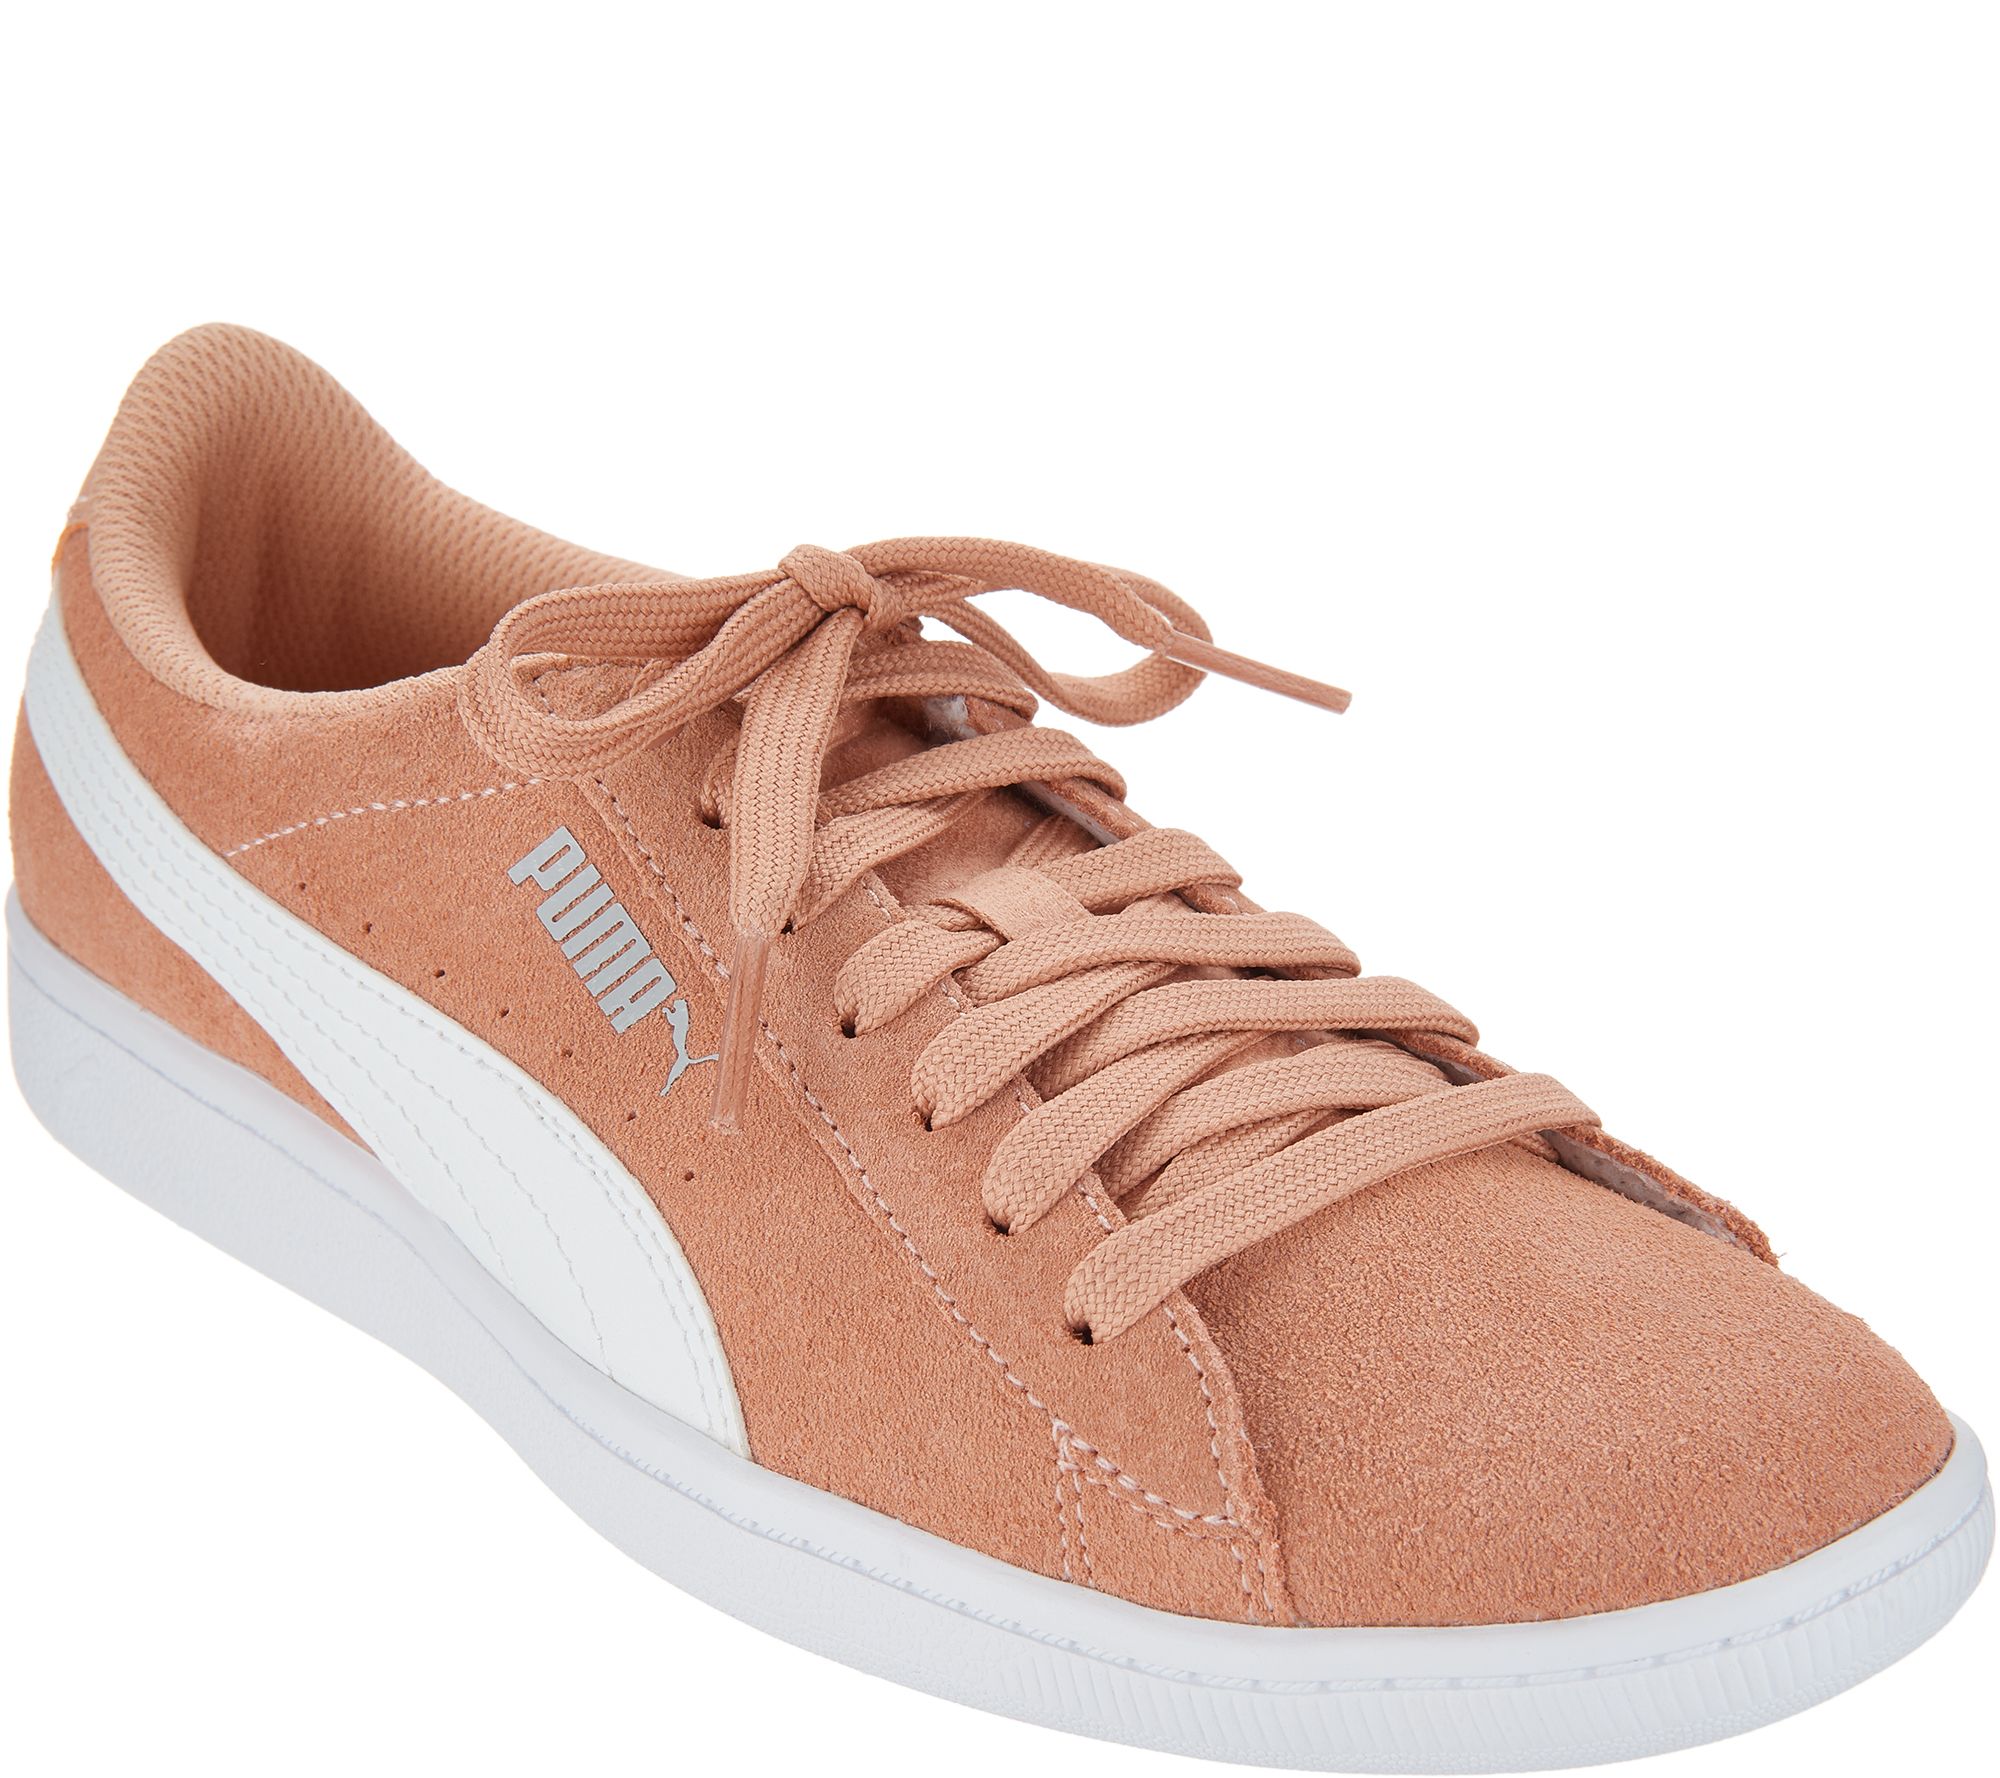 puma suede lace up sneakers vikky classic